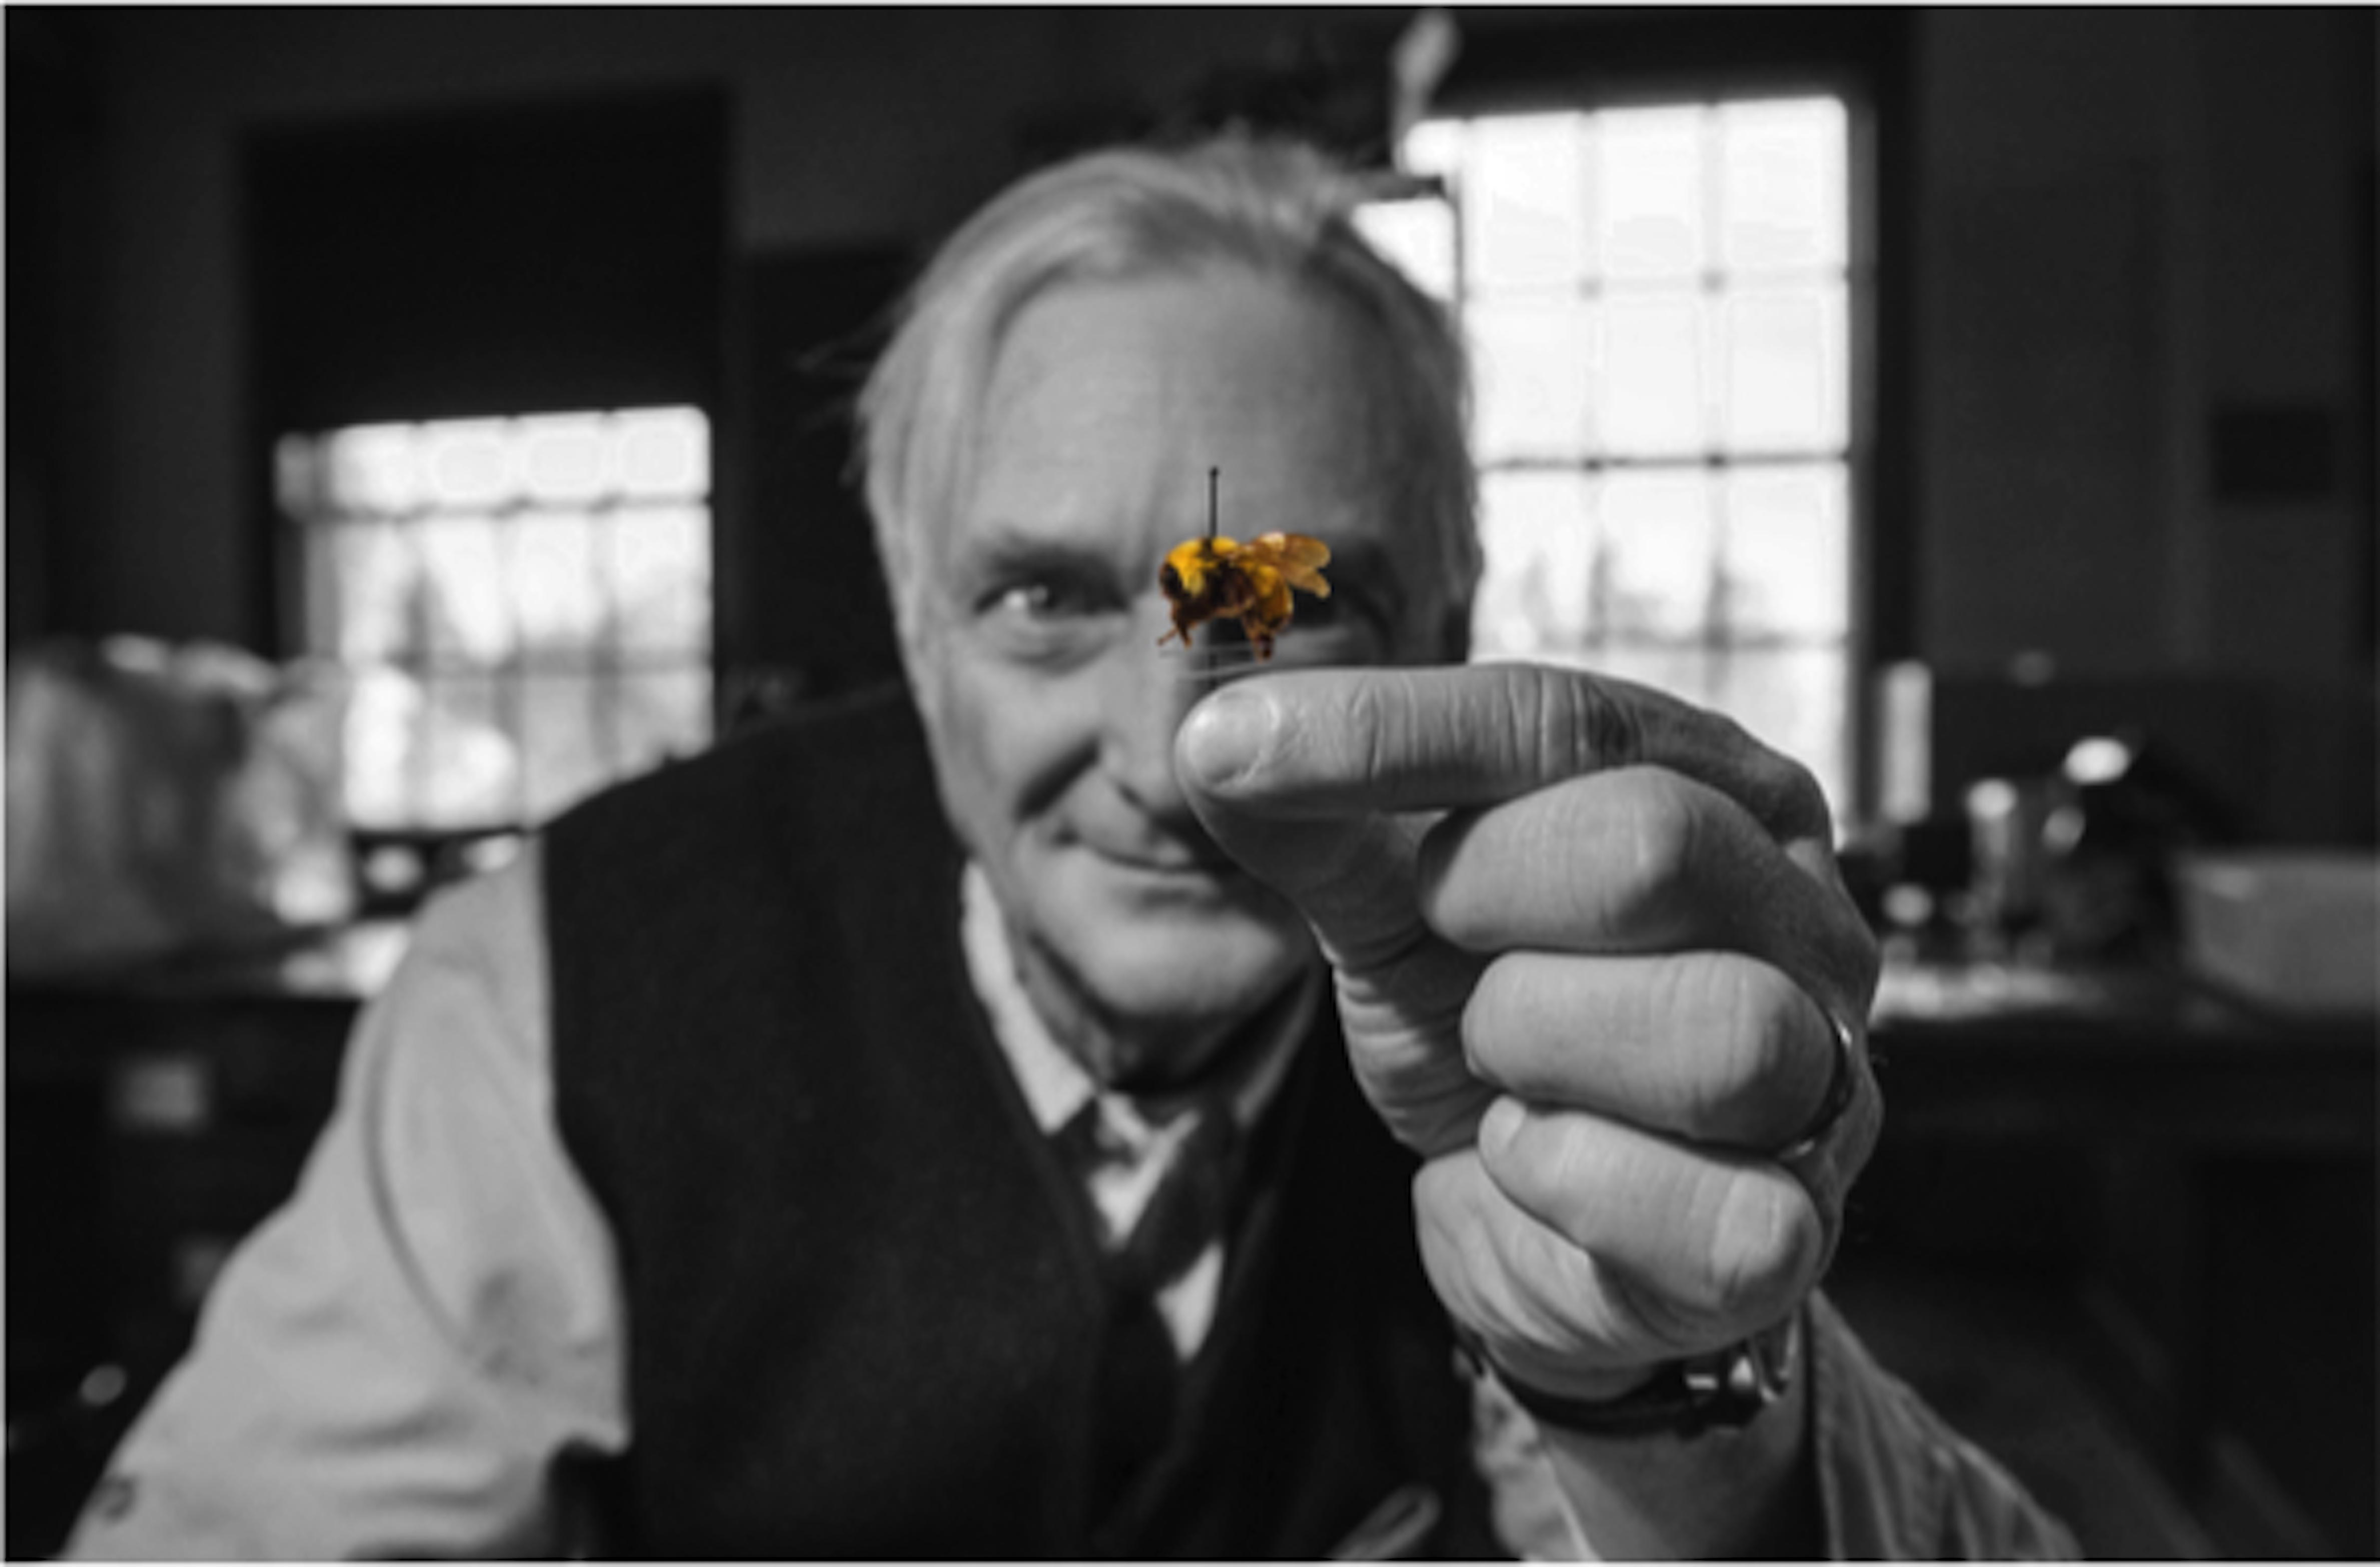 An artistic shot that is in black and white except for the bee, shows a man holding a small bee specimen, which is on a pin.